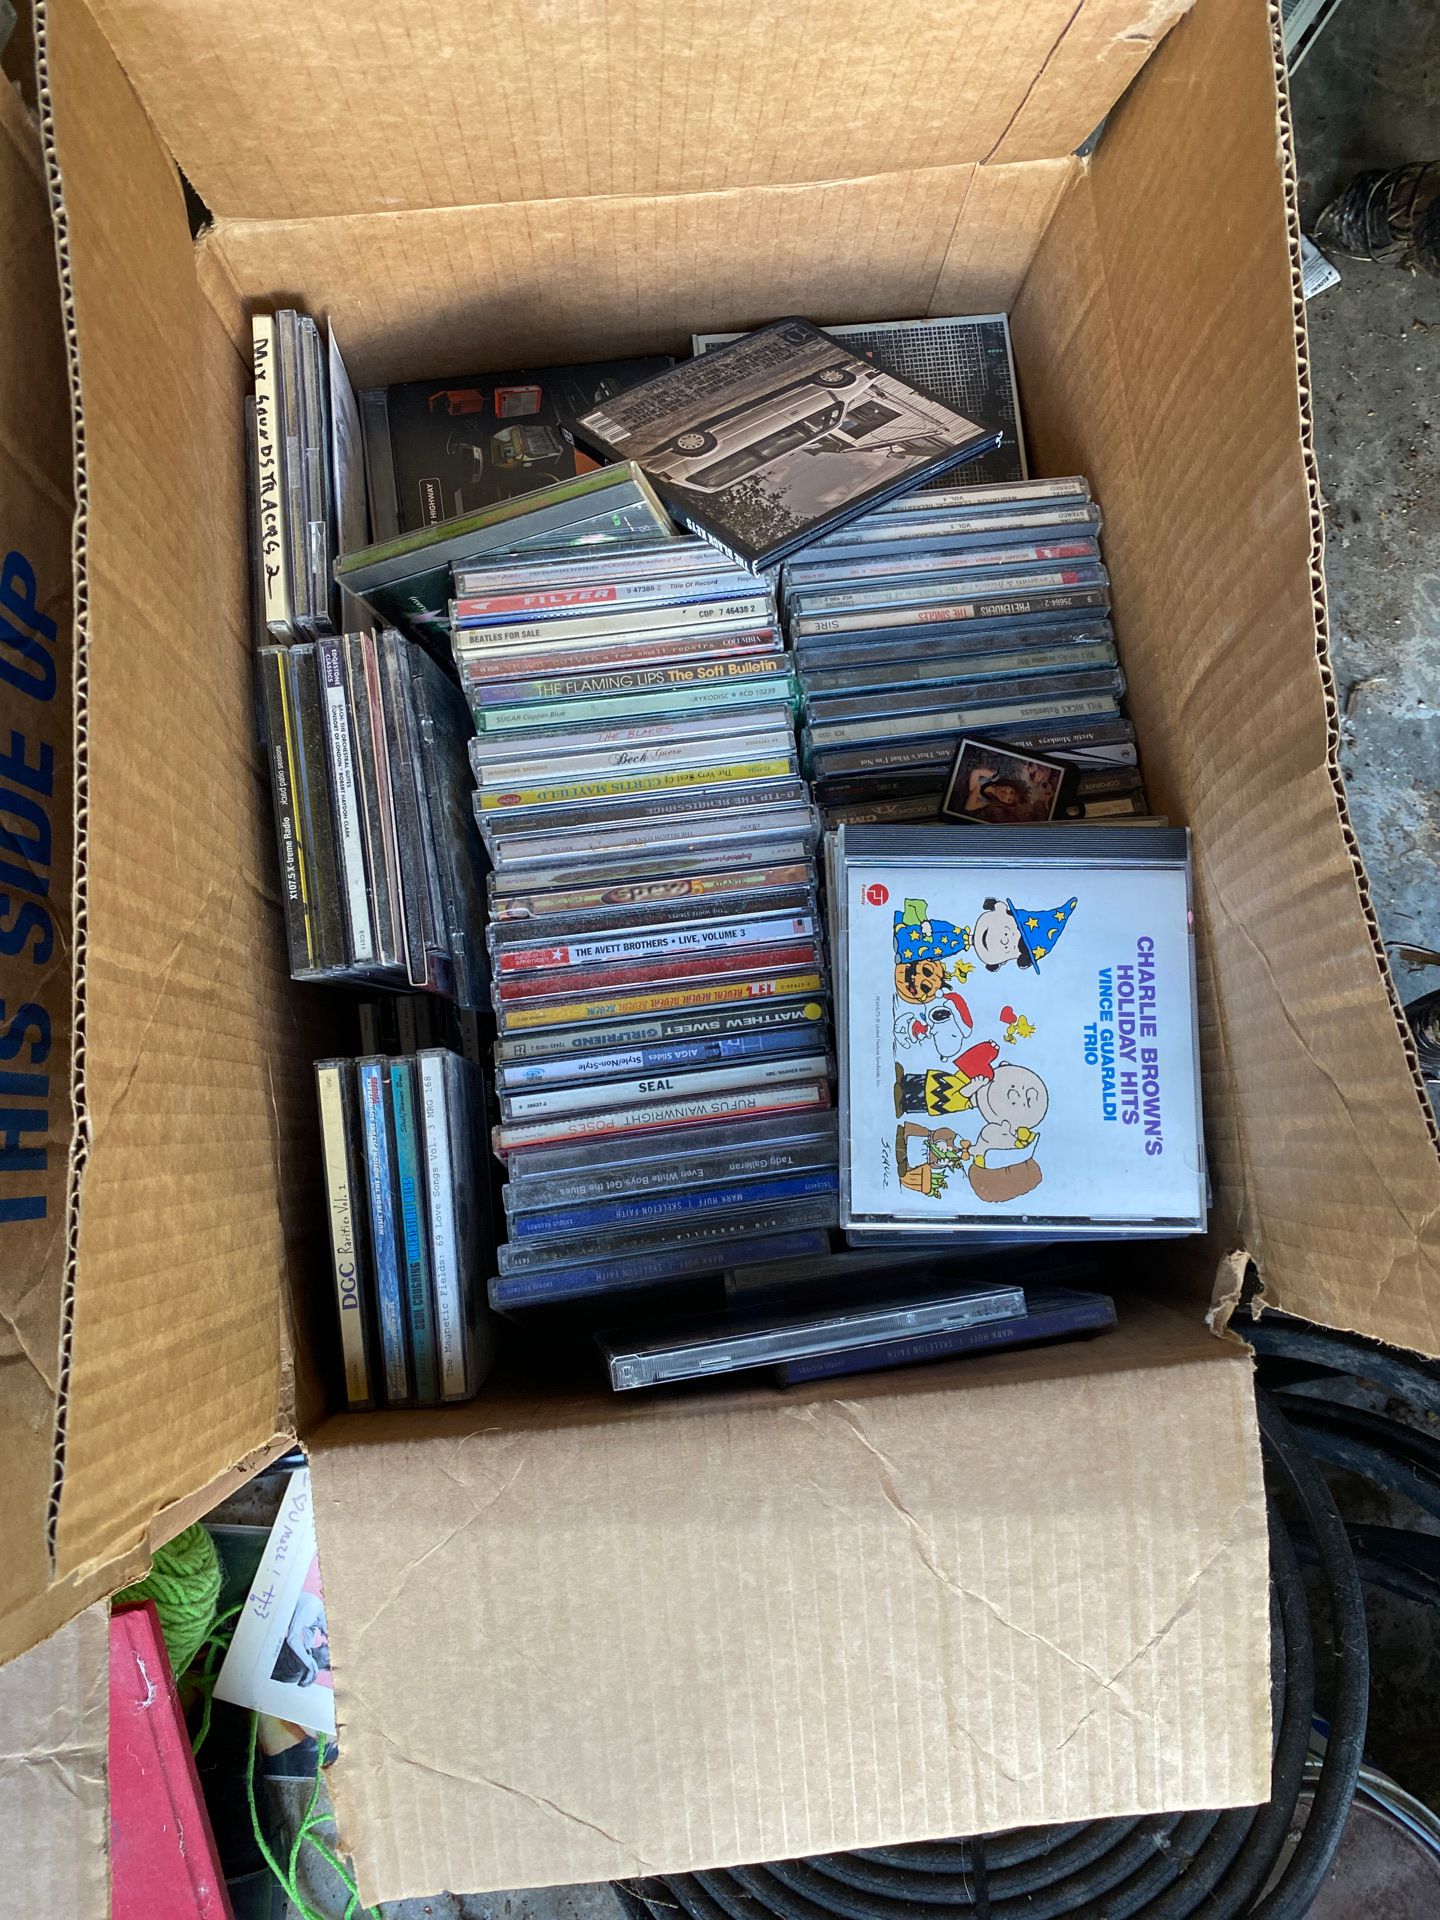 More cds!!!!